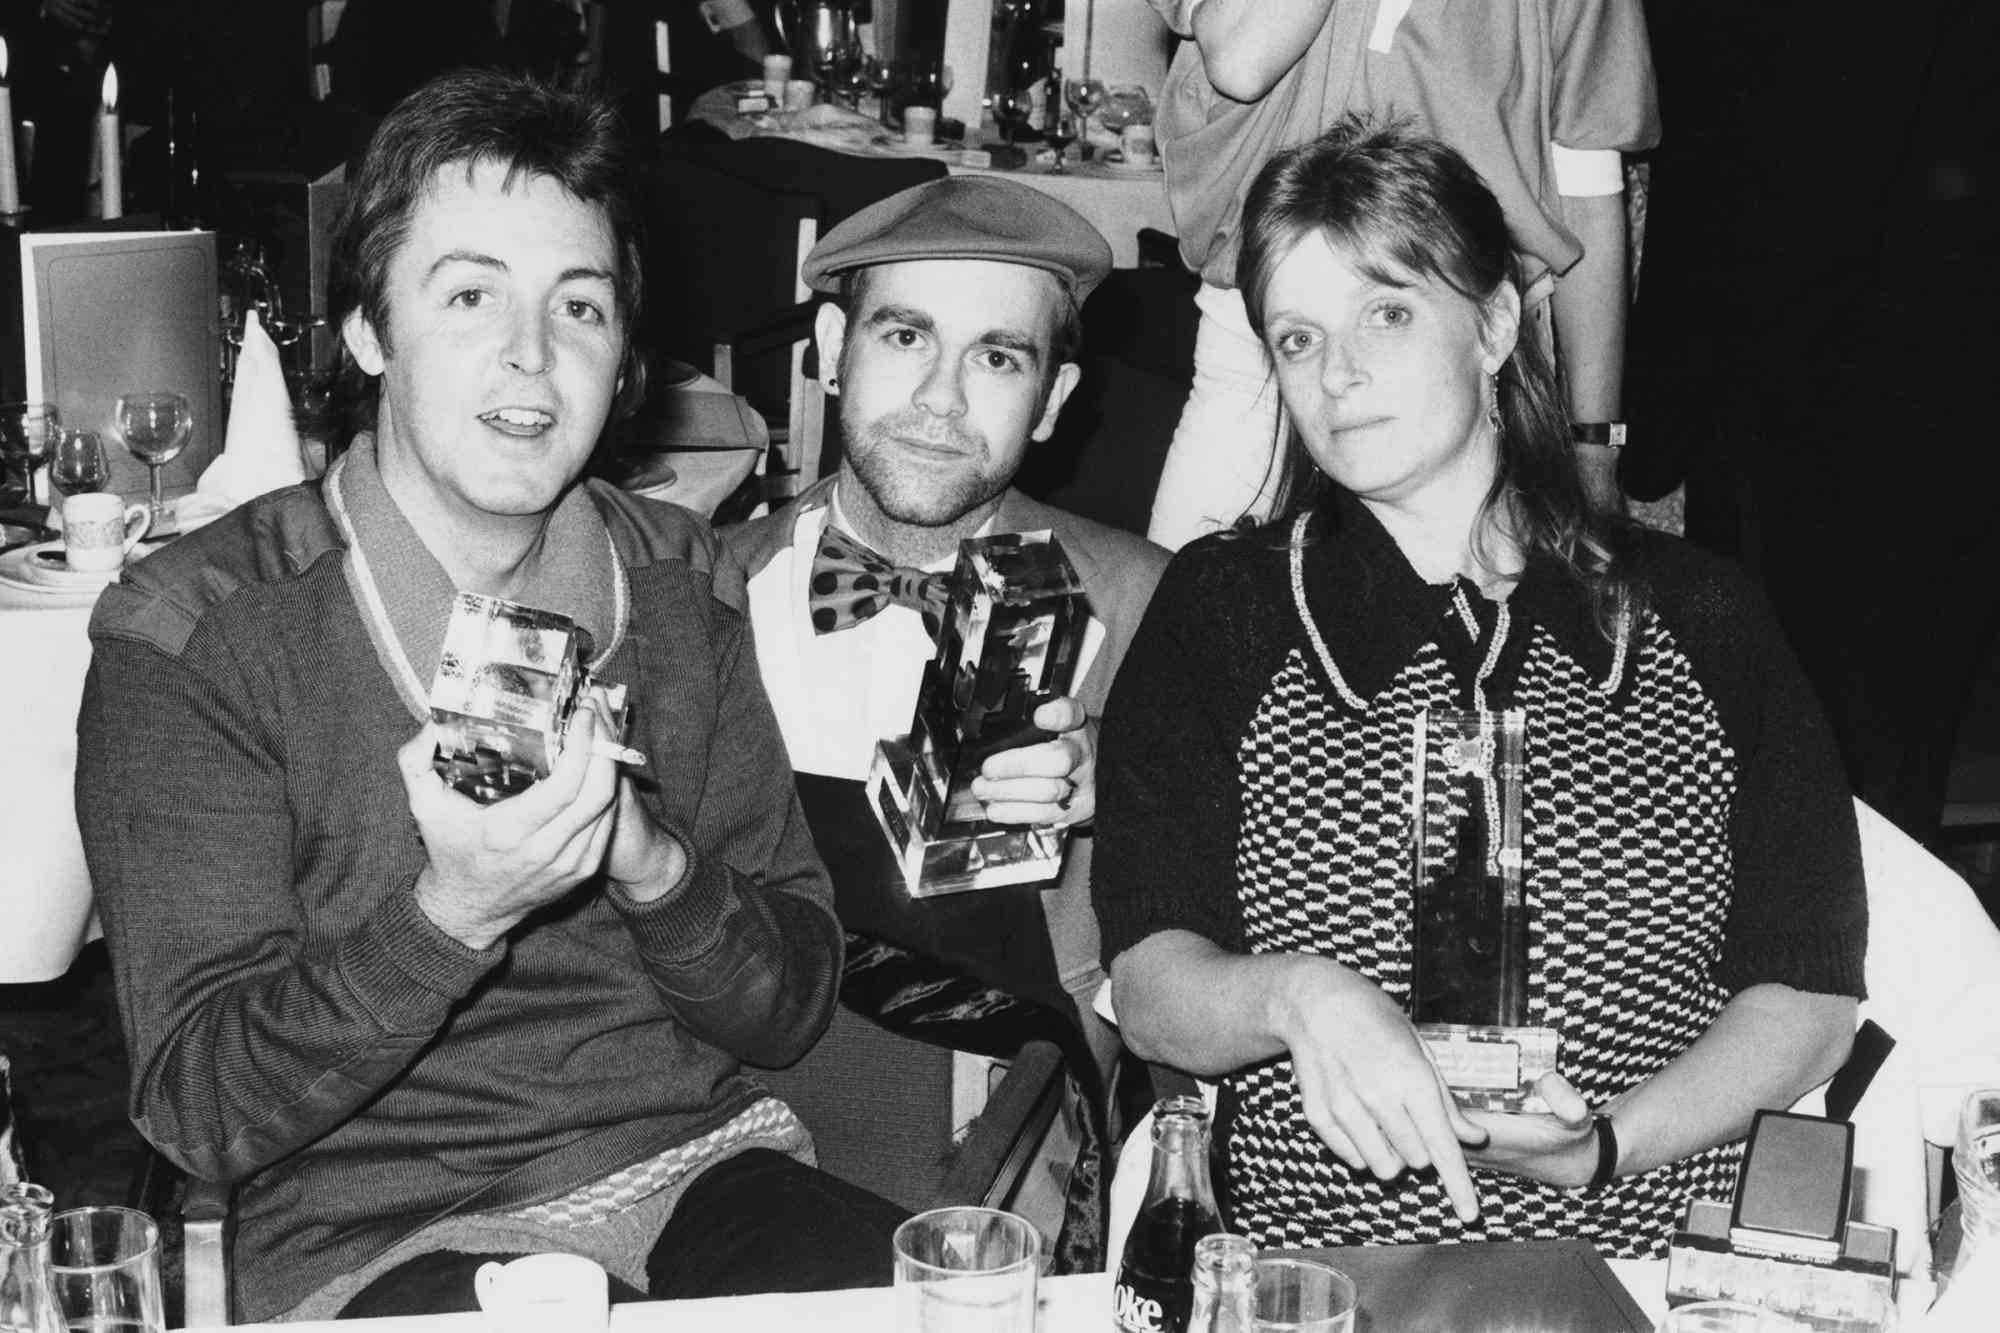 Former Beatle Paul McCartney and his wife Linda with Elton John (centre) at the Capital Radio Music Awards at Grosvenor House, London, 22nd March 1978